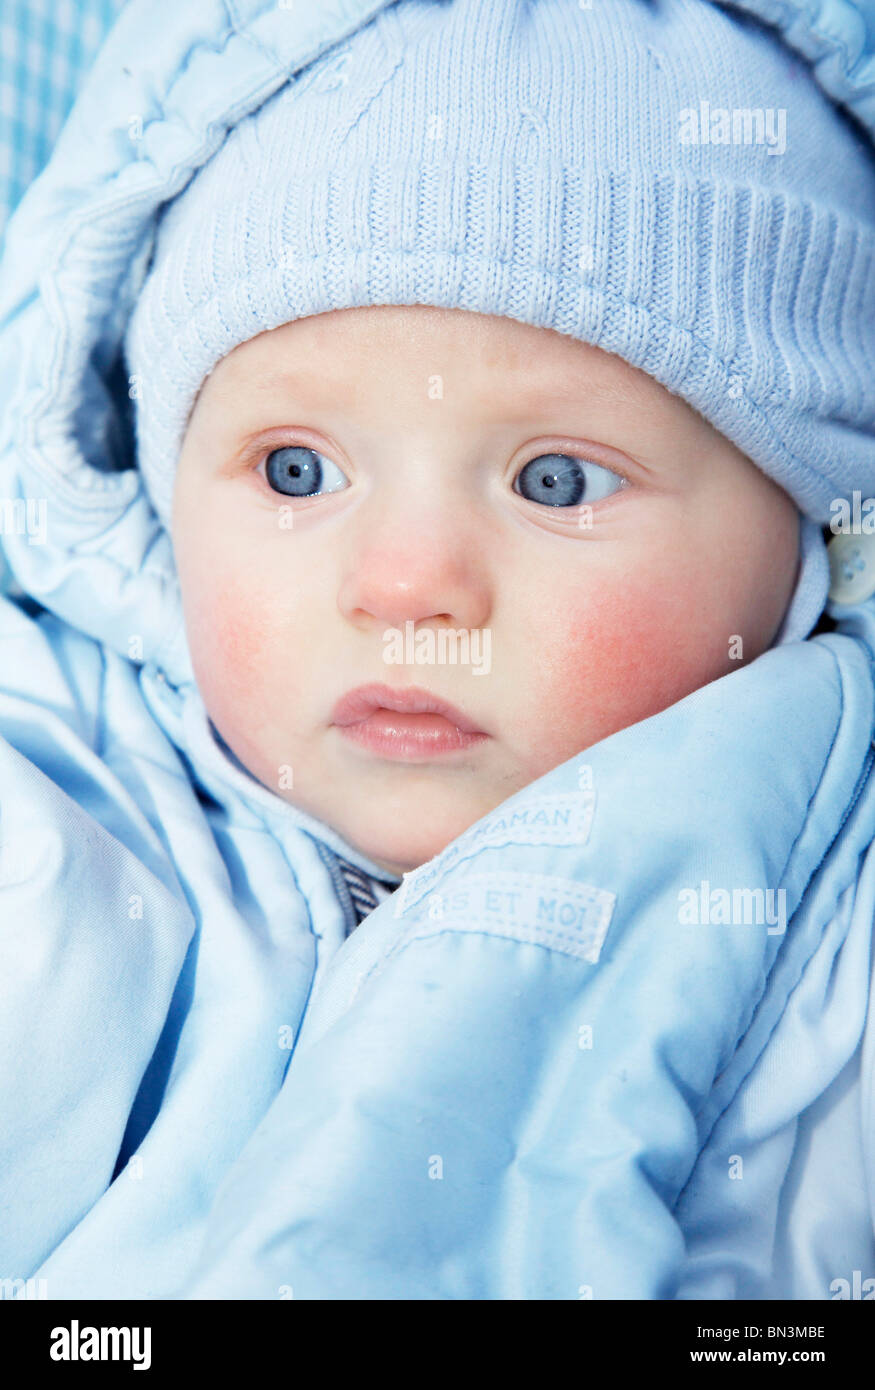 Baby wearing a blue cap and jacket, portrait Stock Photo